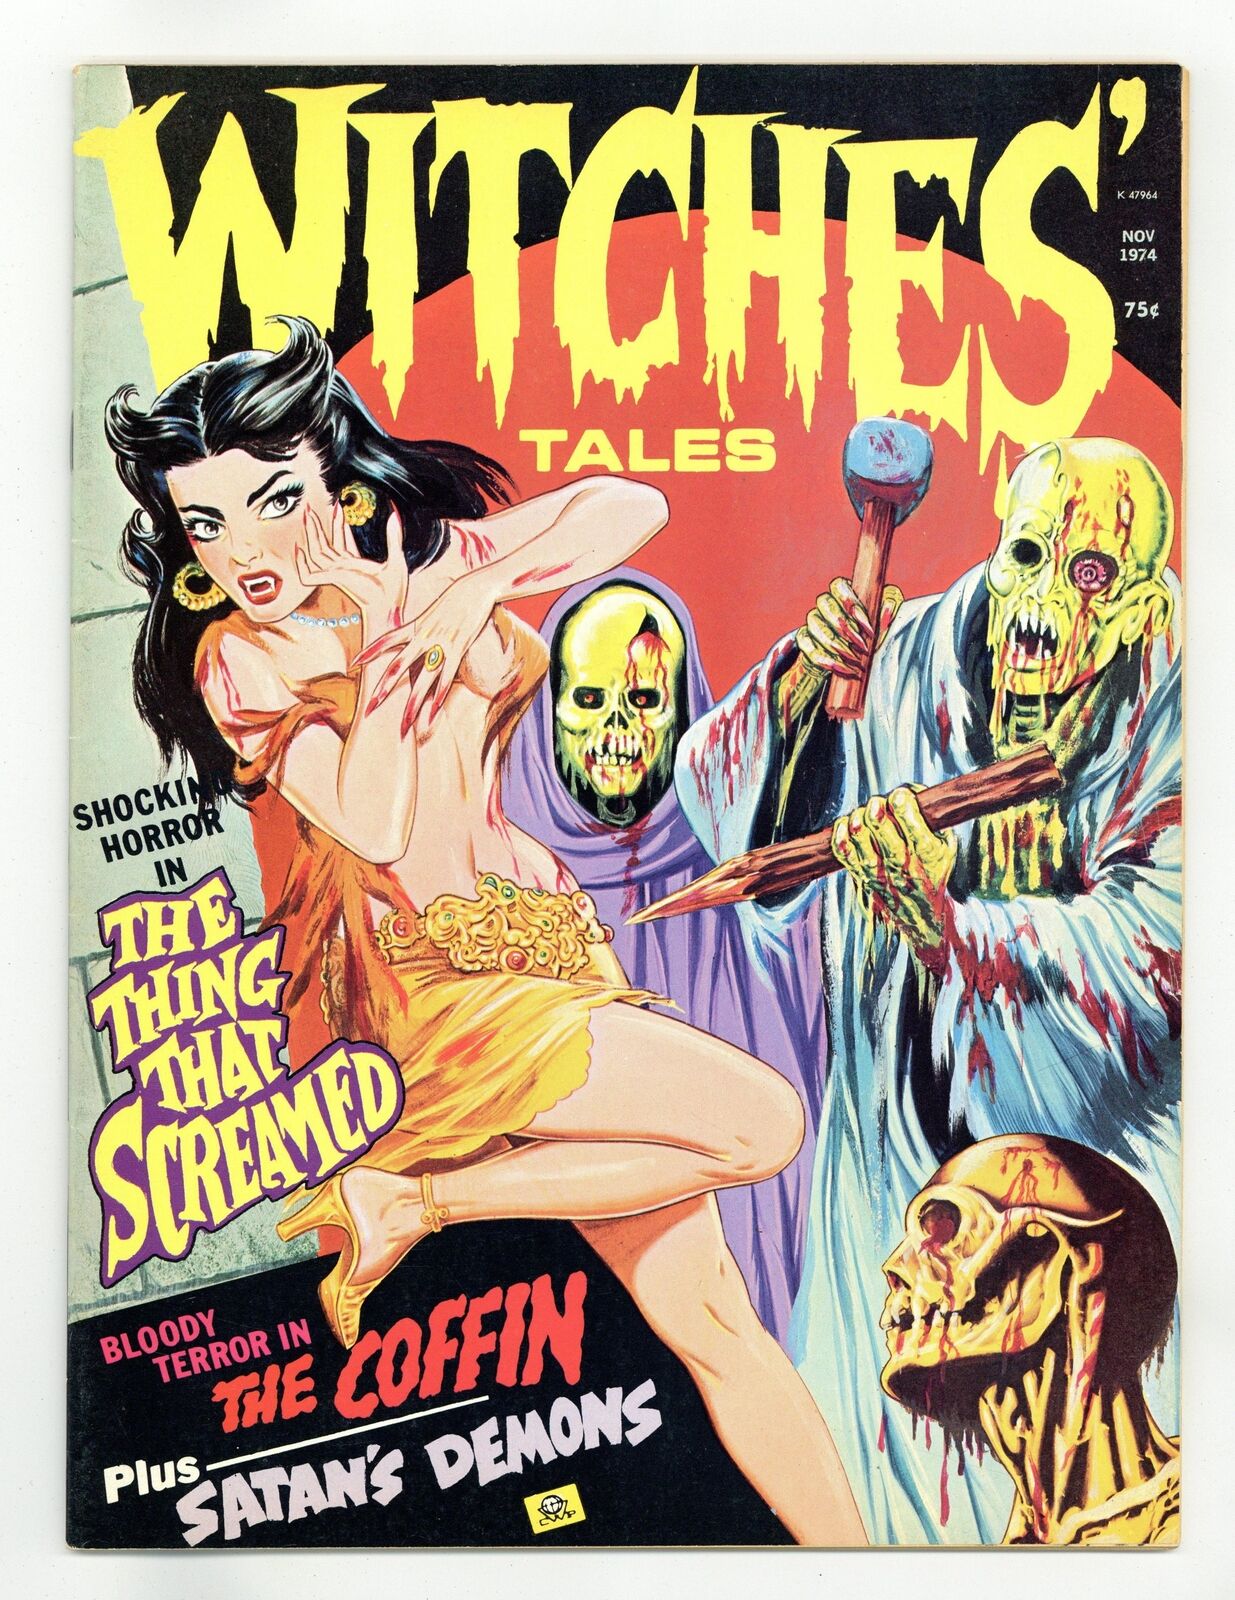 Witches Tales Vol. 6 #6 VG+ 4.5 1974